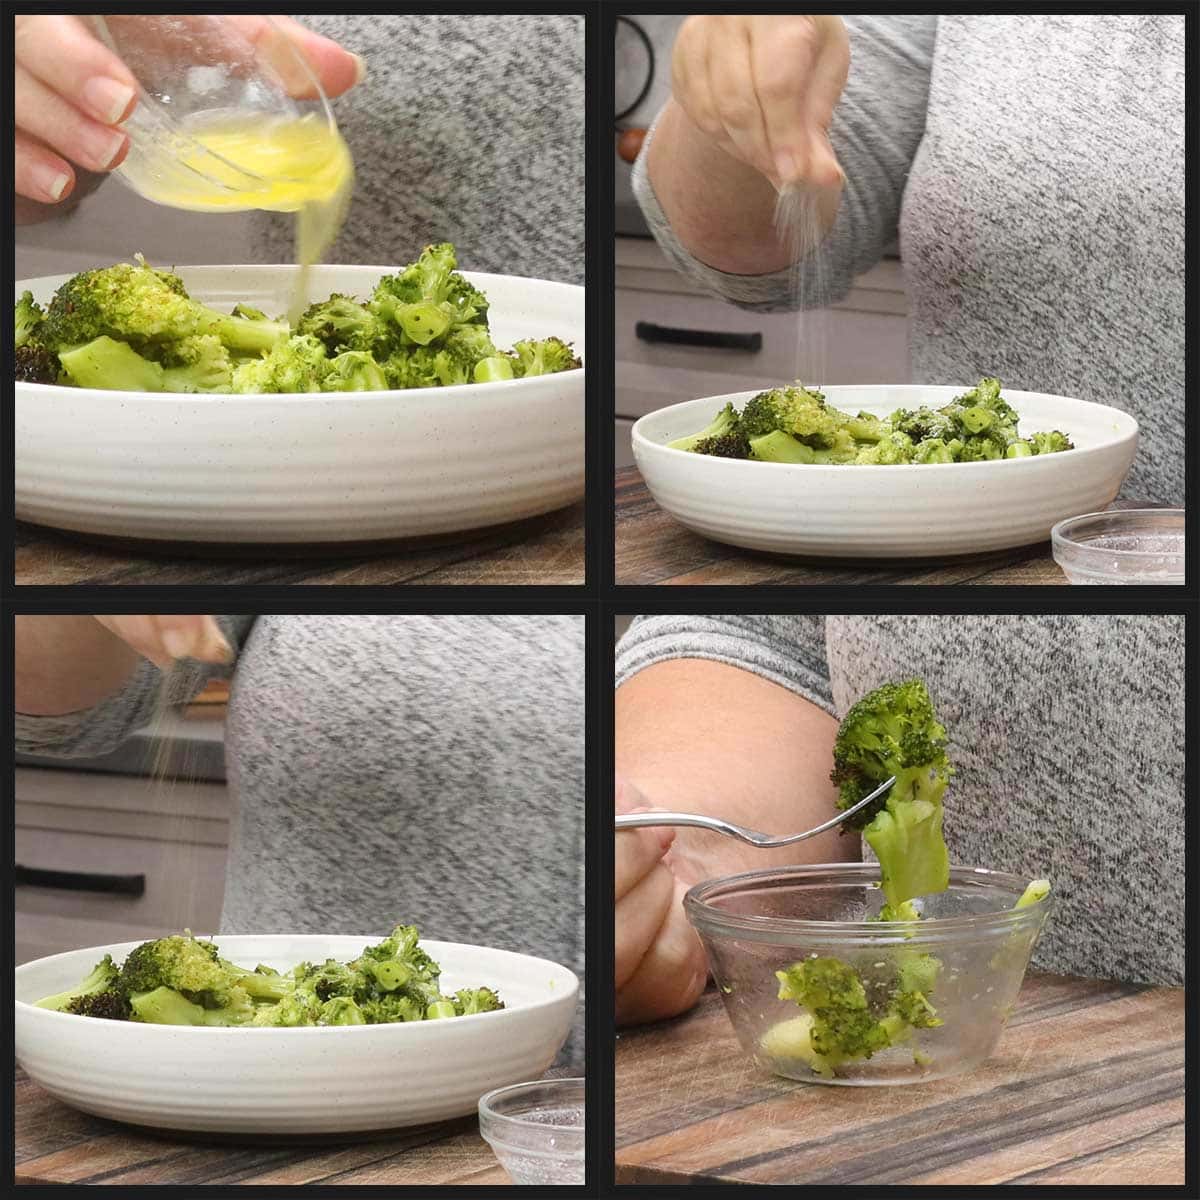 pouring melted butter over broccoli and seasoning it.